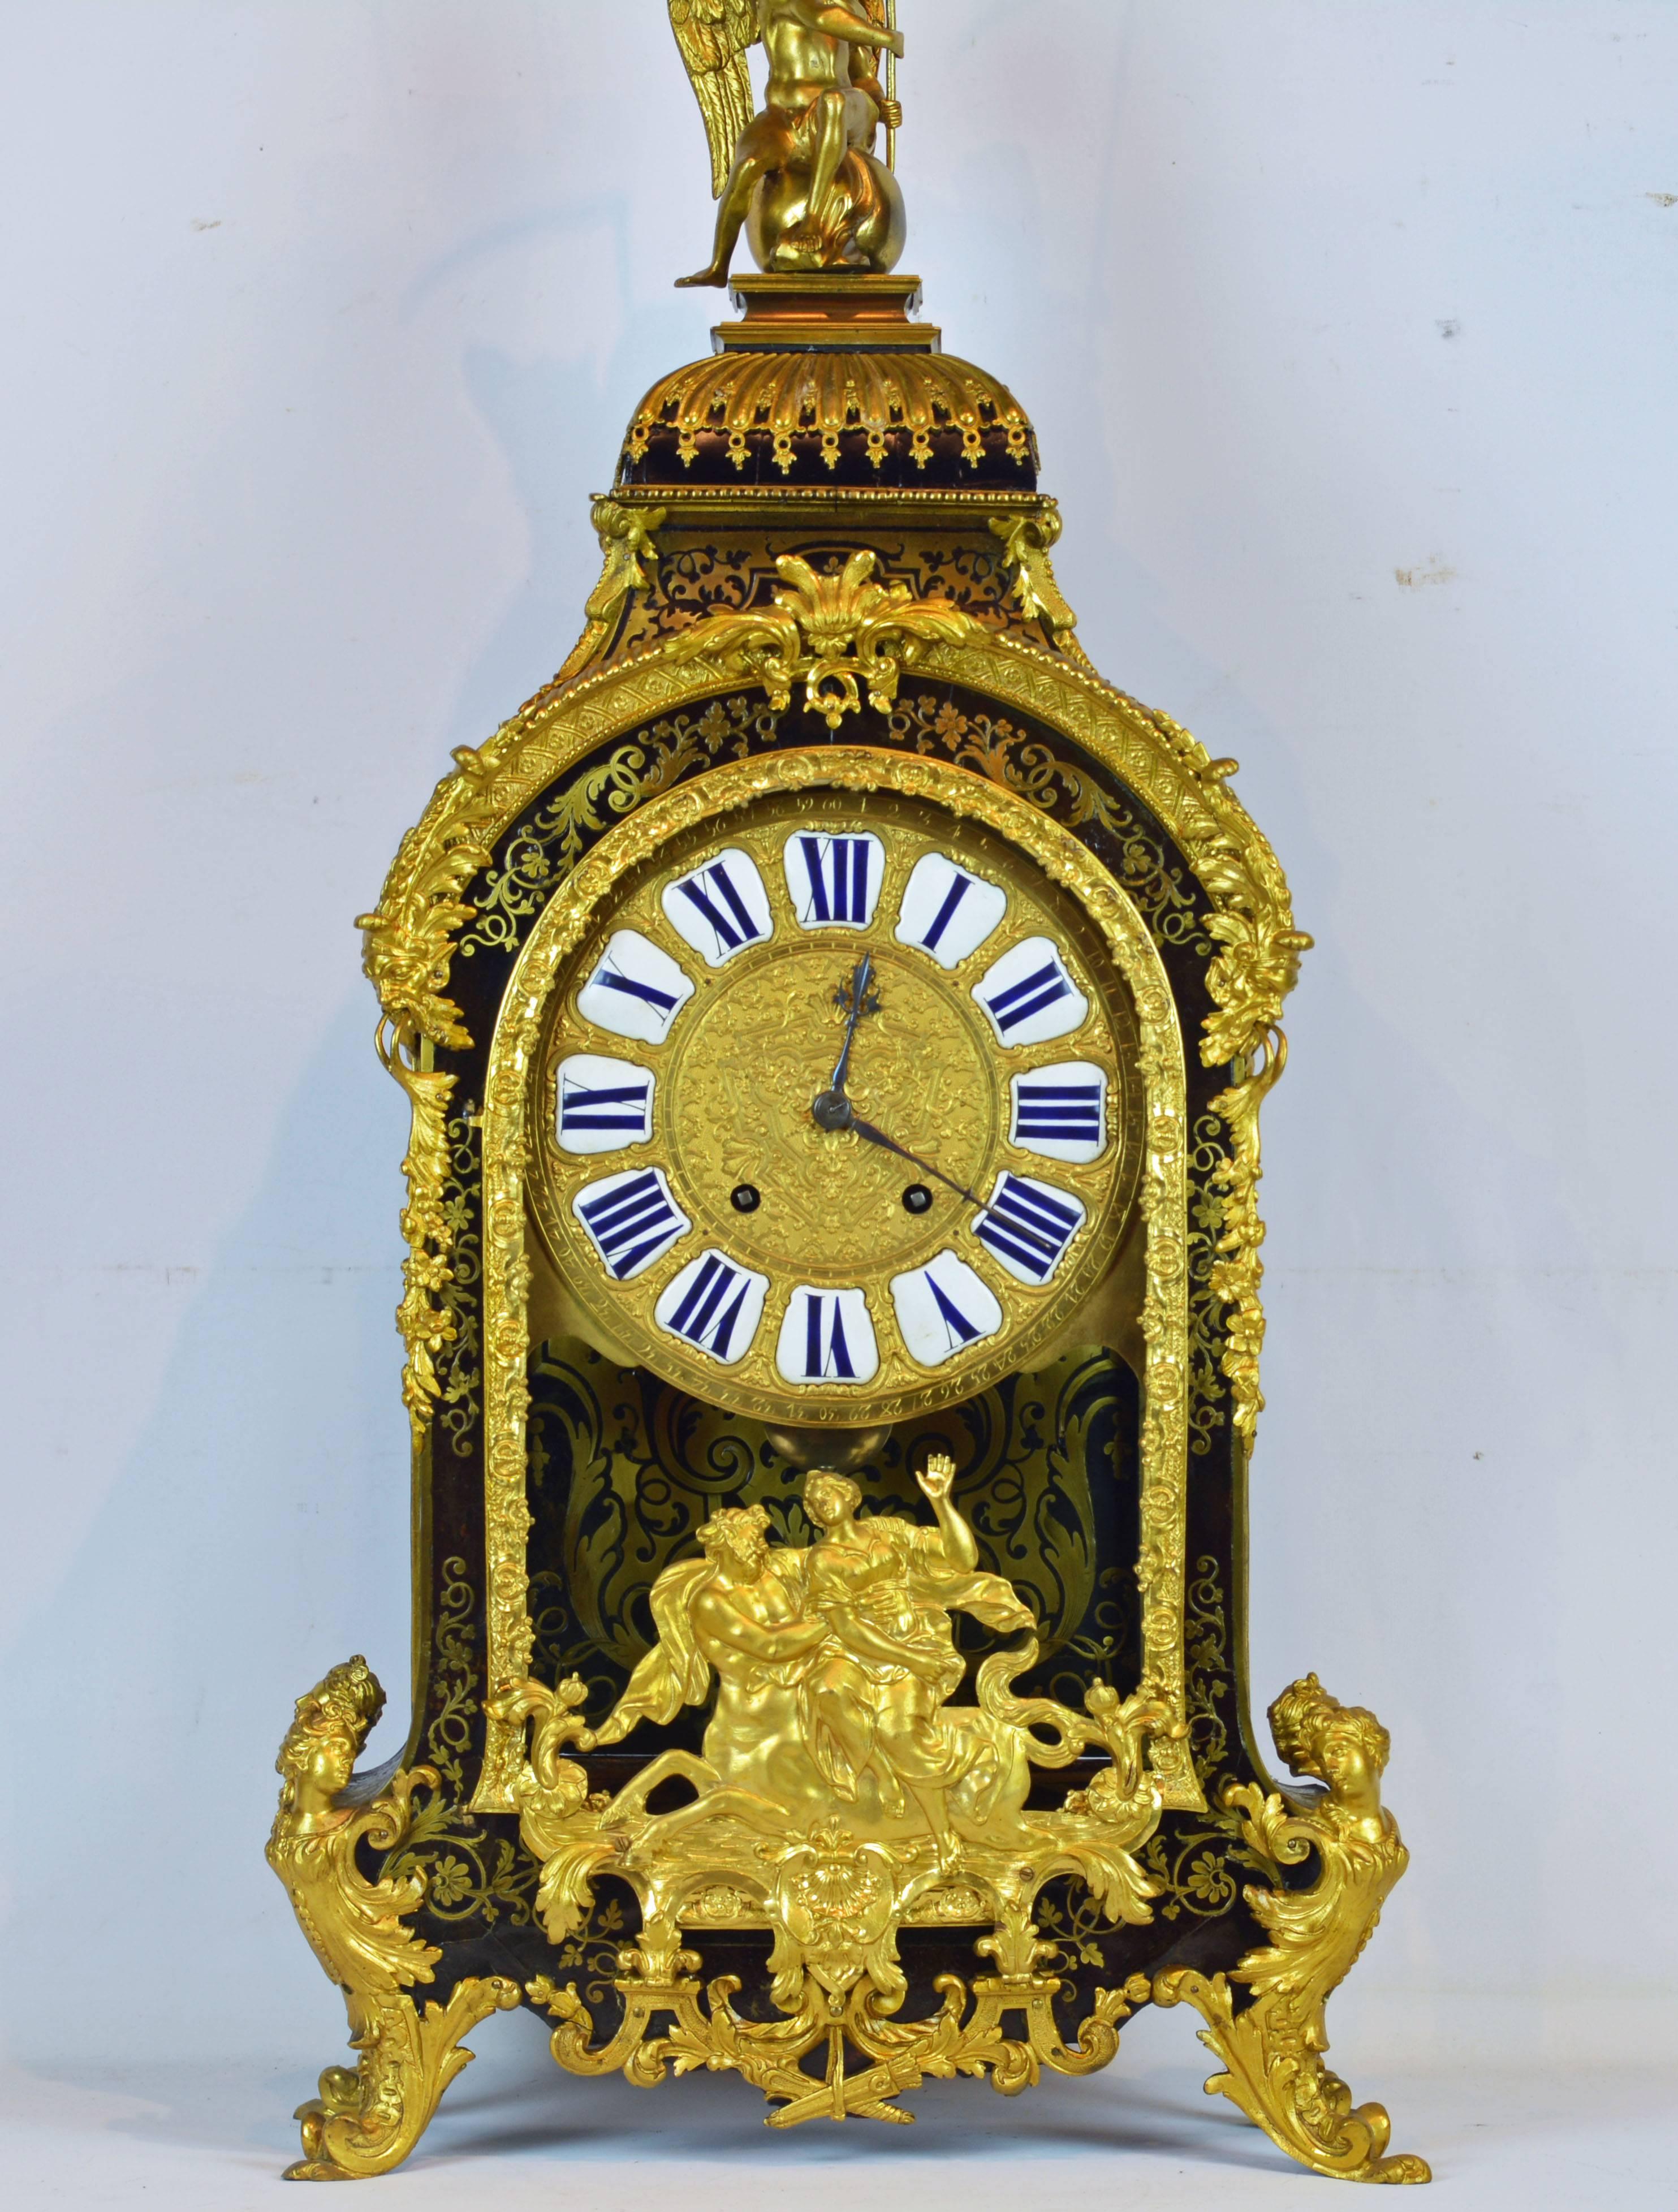 Standing 43 inches tall this impressive clock features an arched pediment surmounted by a gilt bronze figure of the archangel St Michael seated on a globe and holding up his banner. The Boulle style brass inlaid case, richly edged by scrolled ormolu